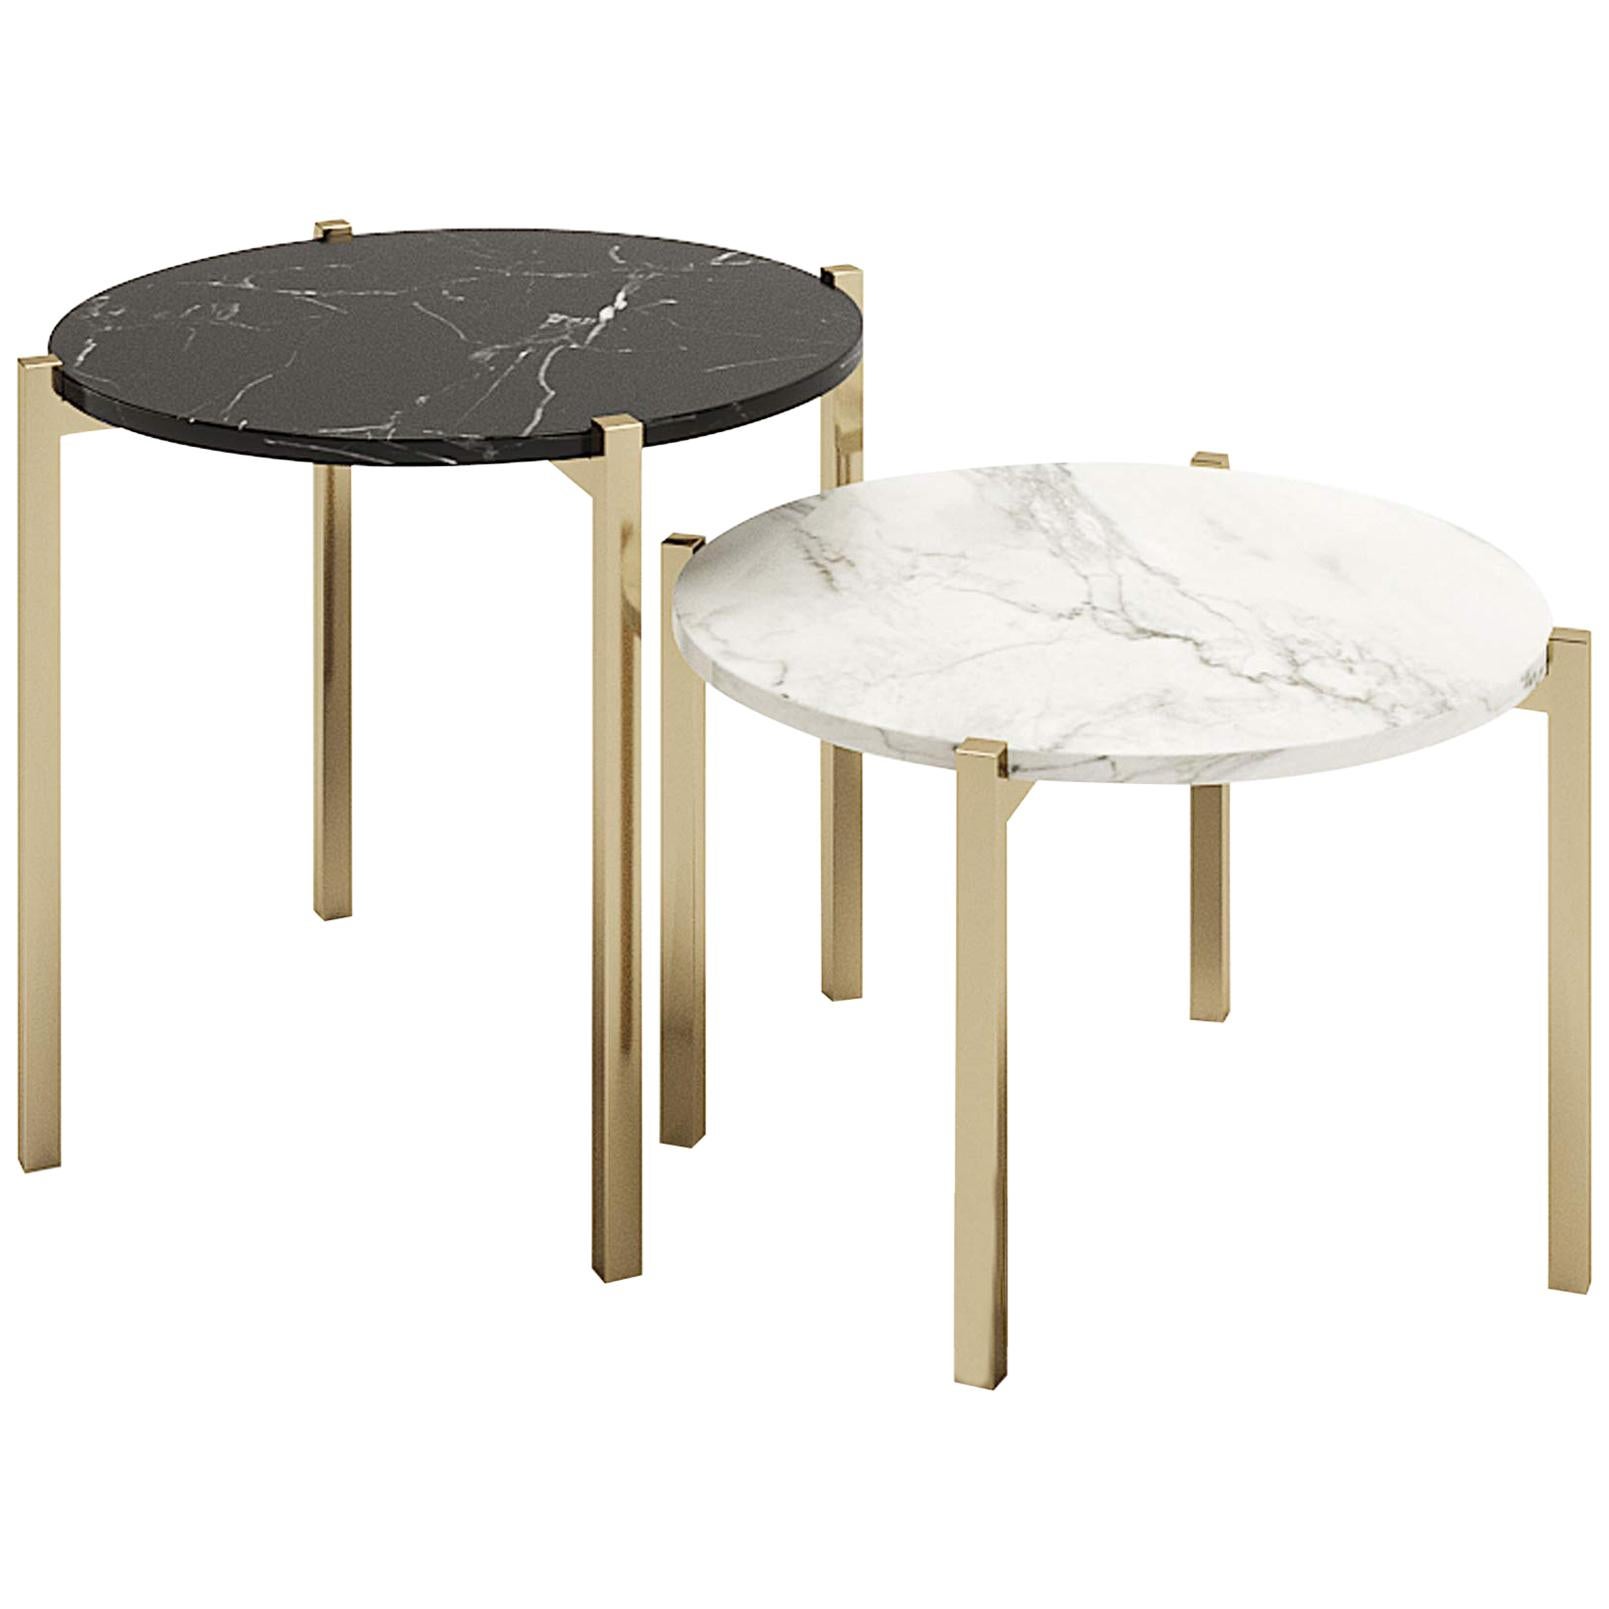 Set of Round Table, Design Style, Round Side Table with Coated Metal Legs